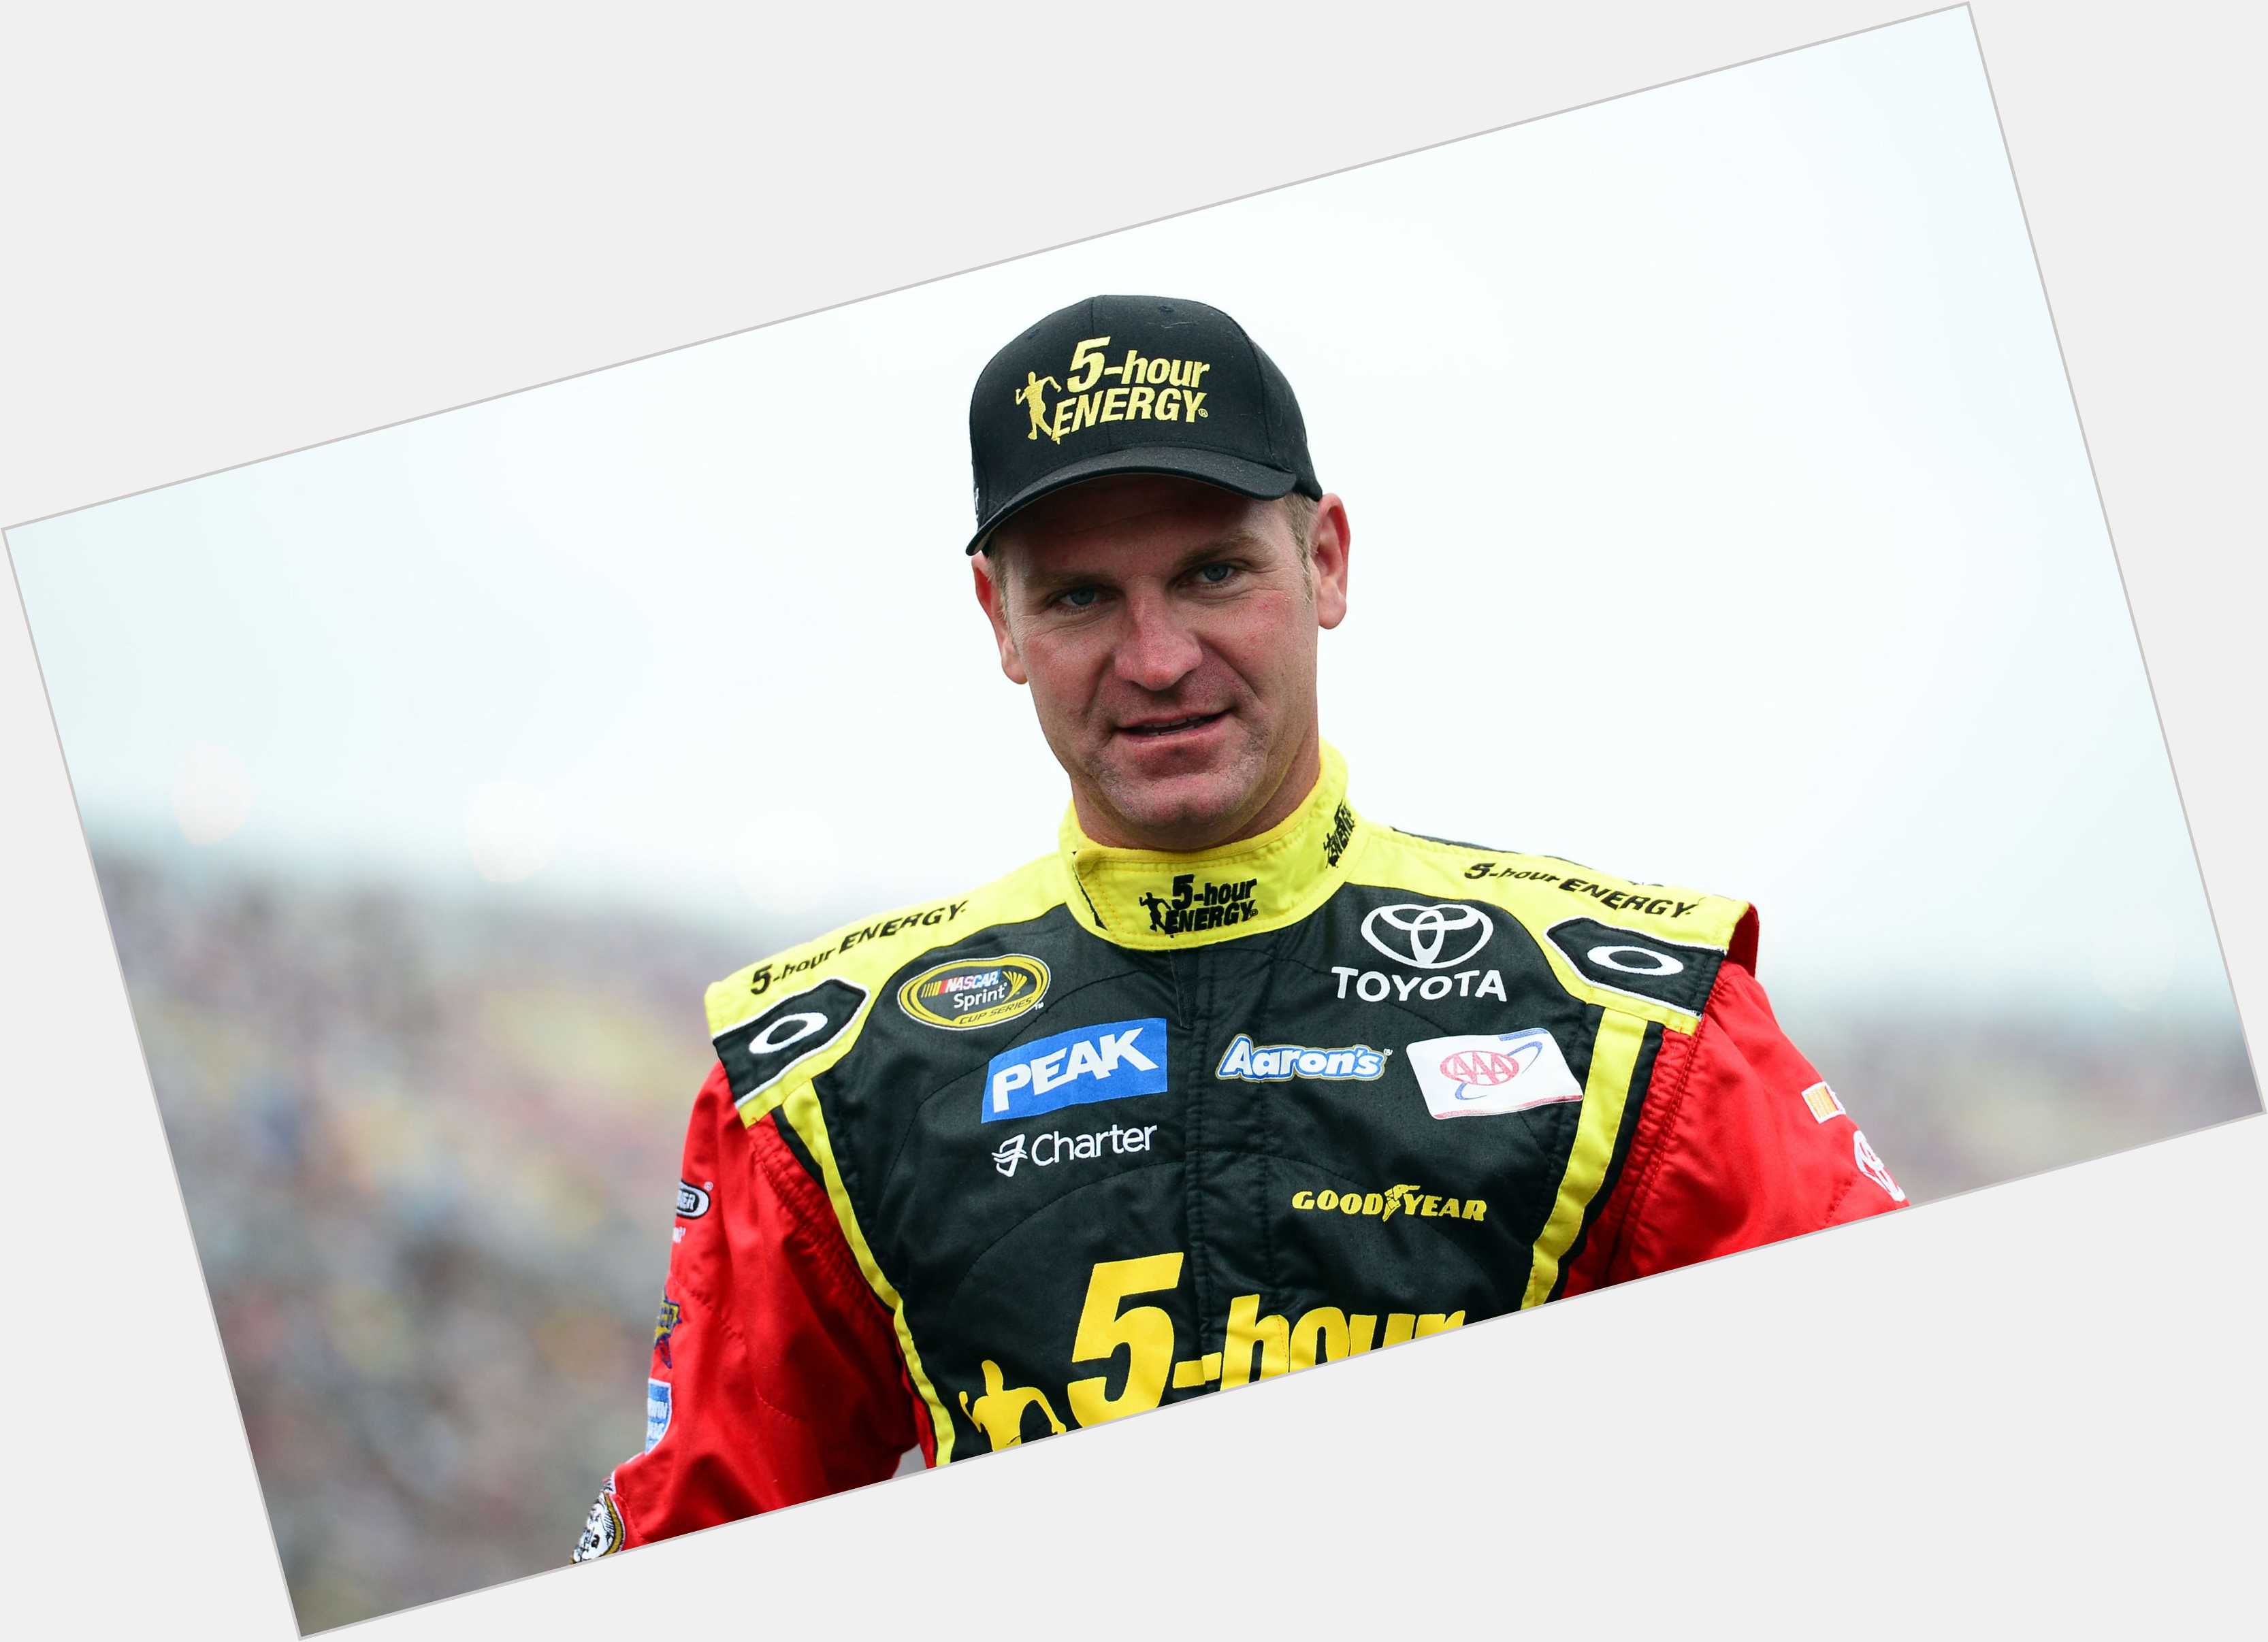 Clint Bowyer light brown hair & hairstyles Athletic body, 